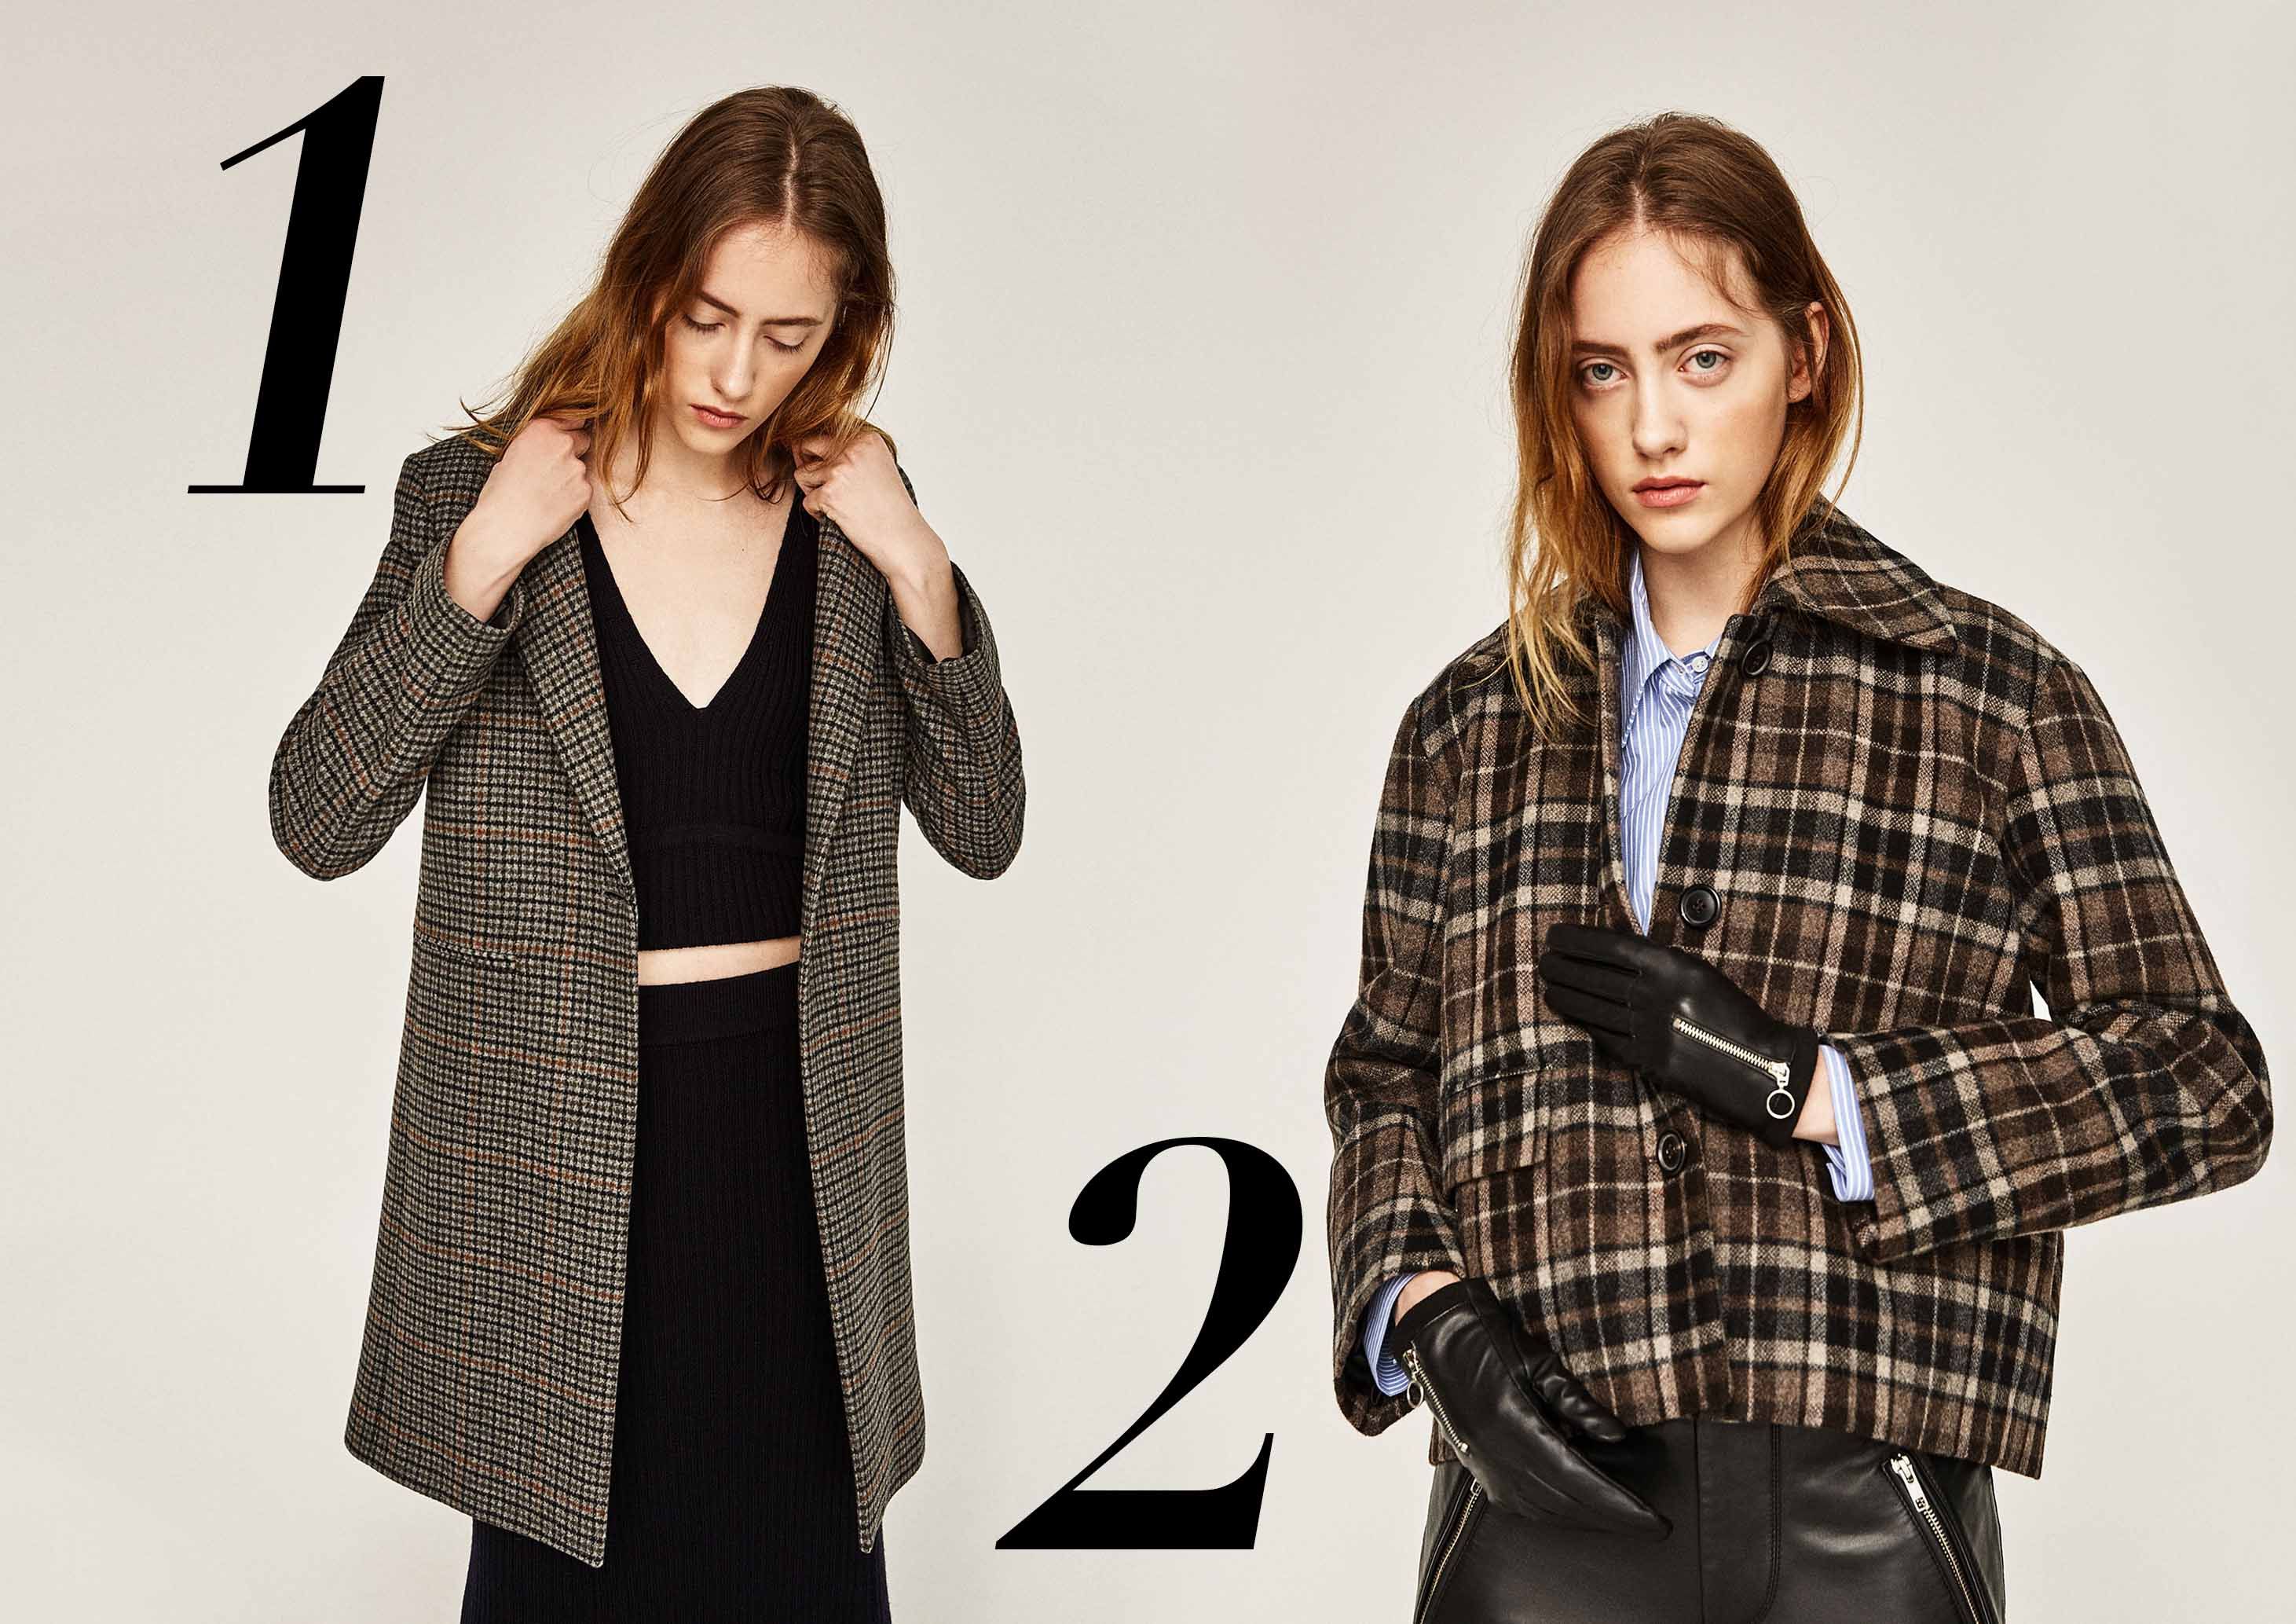 Out of Idea For Office Look?  Let's Show On Point With Plaid Print